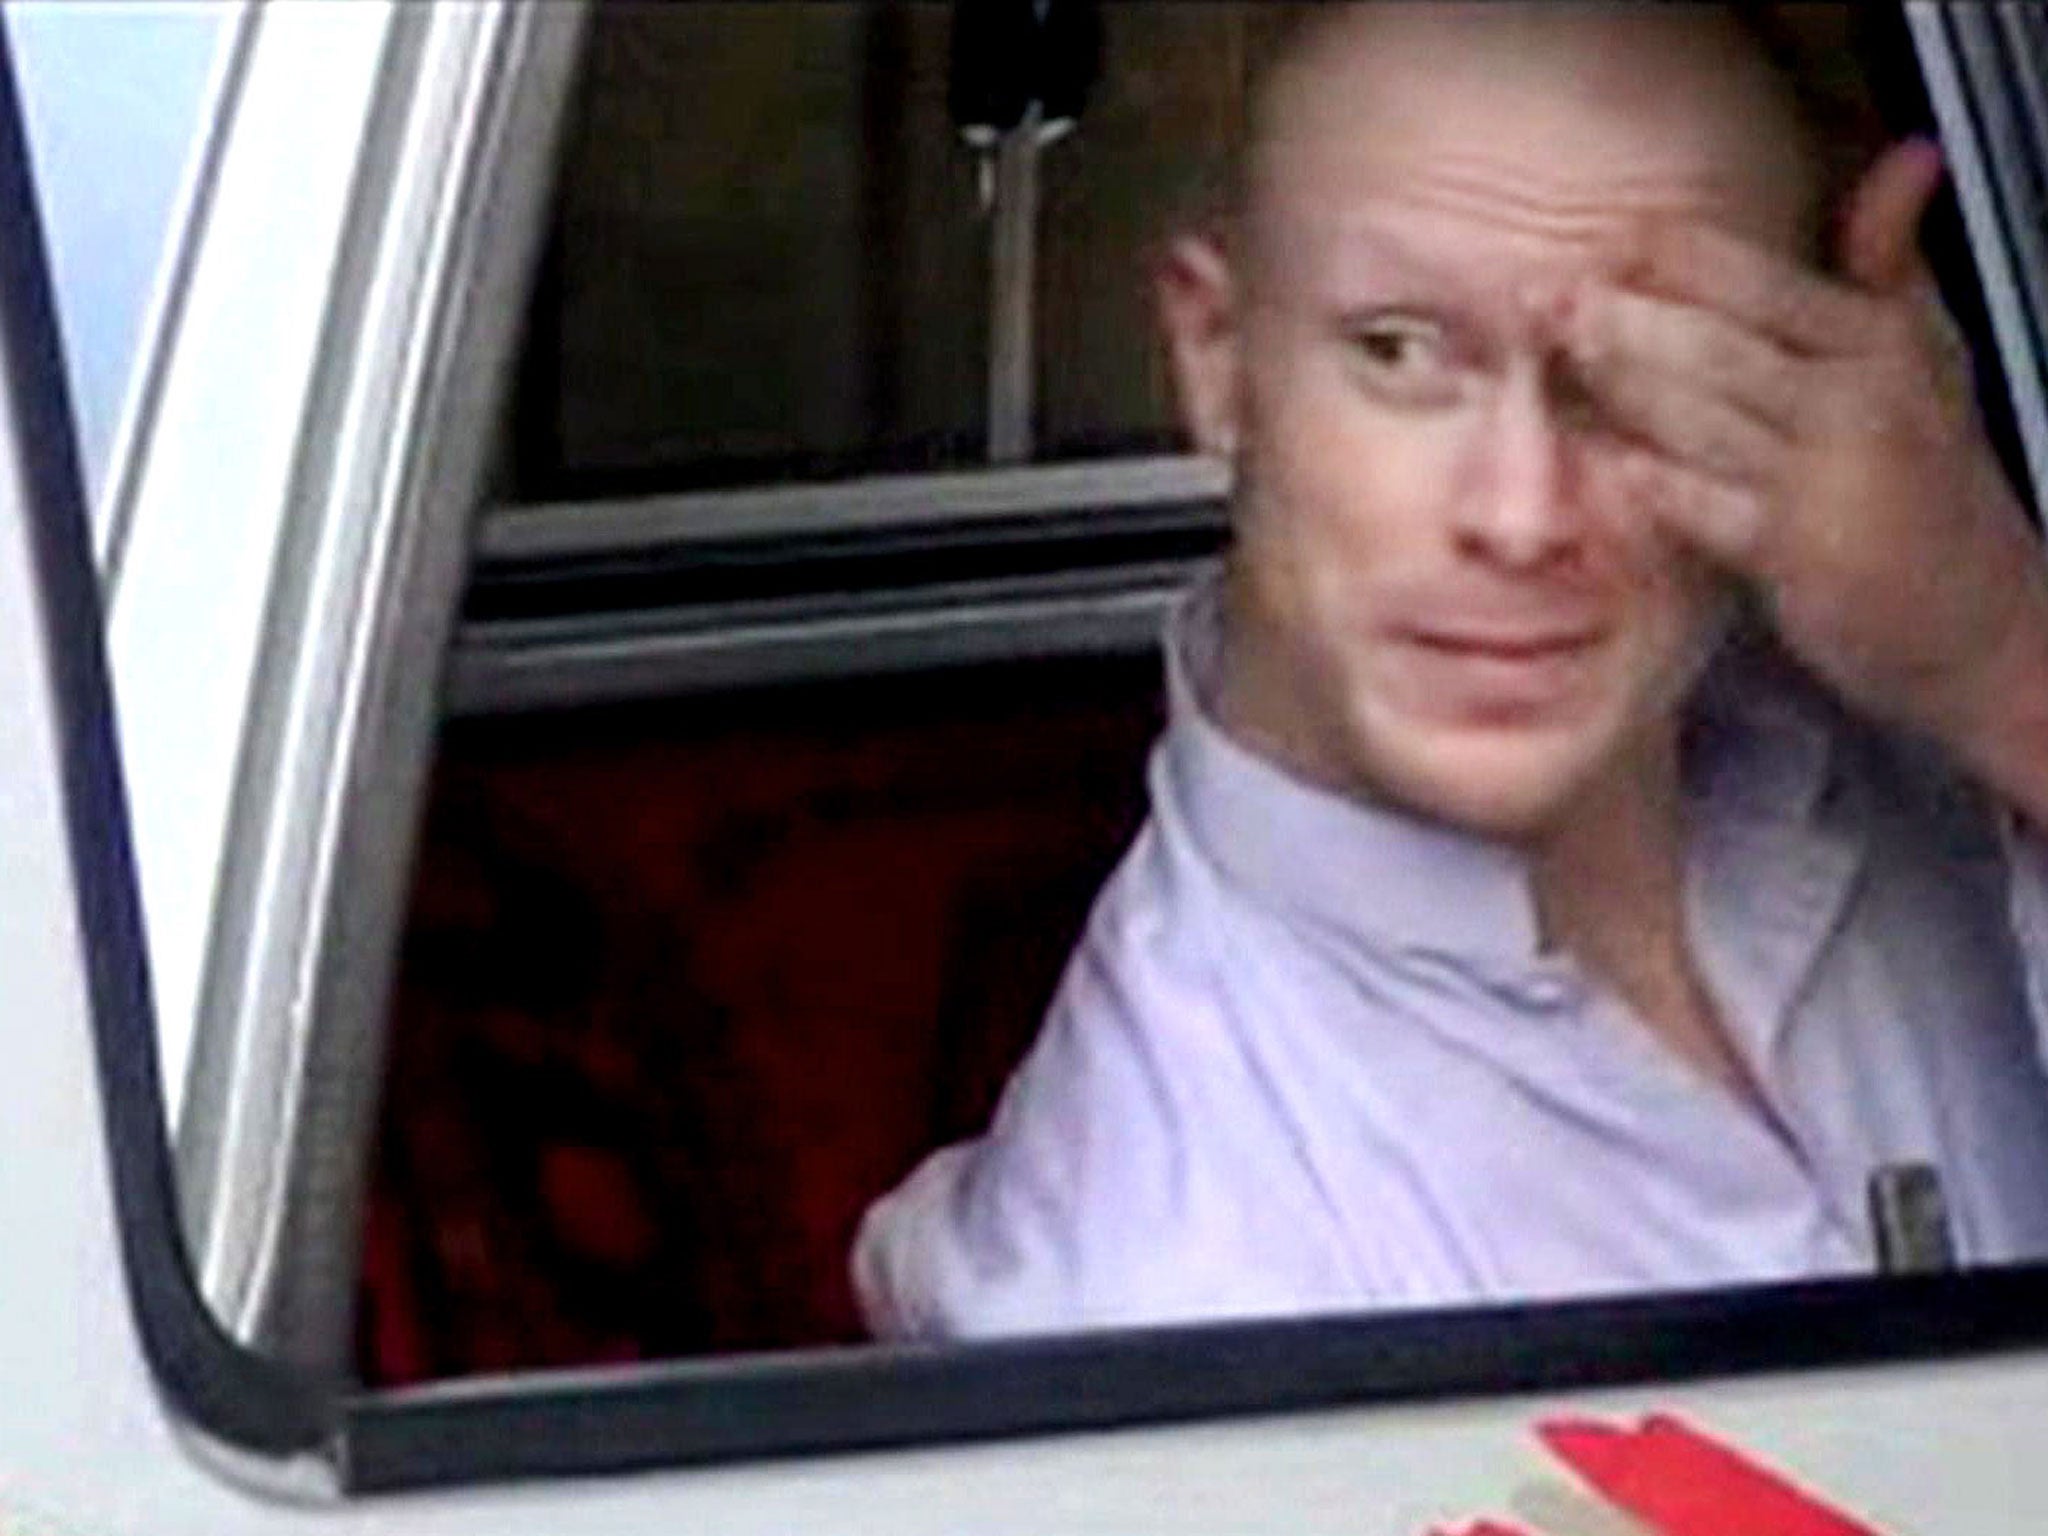 Sgt. Bowe Bergdahl, sits in a vehicle guarded by the Taliban in eastern Afghanistan. Bergdahl was freed by the Taliban on May 31, 2014, in exchange for five Afghan detainees held in the U.S. prison at Guantanamo Bay, Cuba